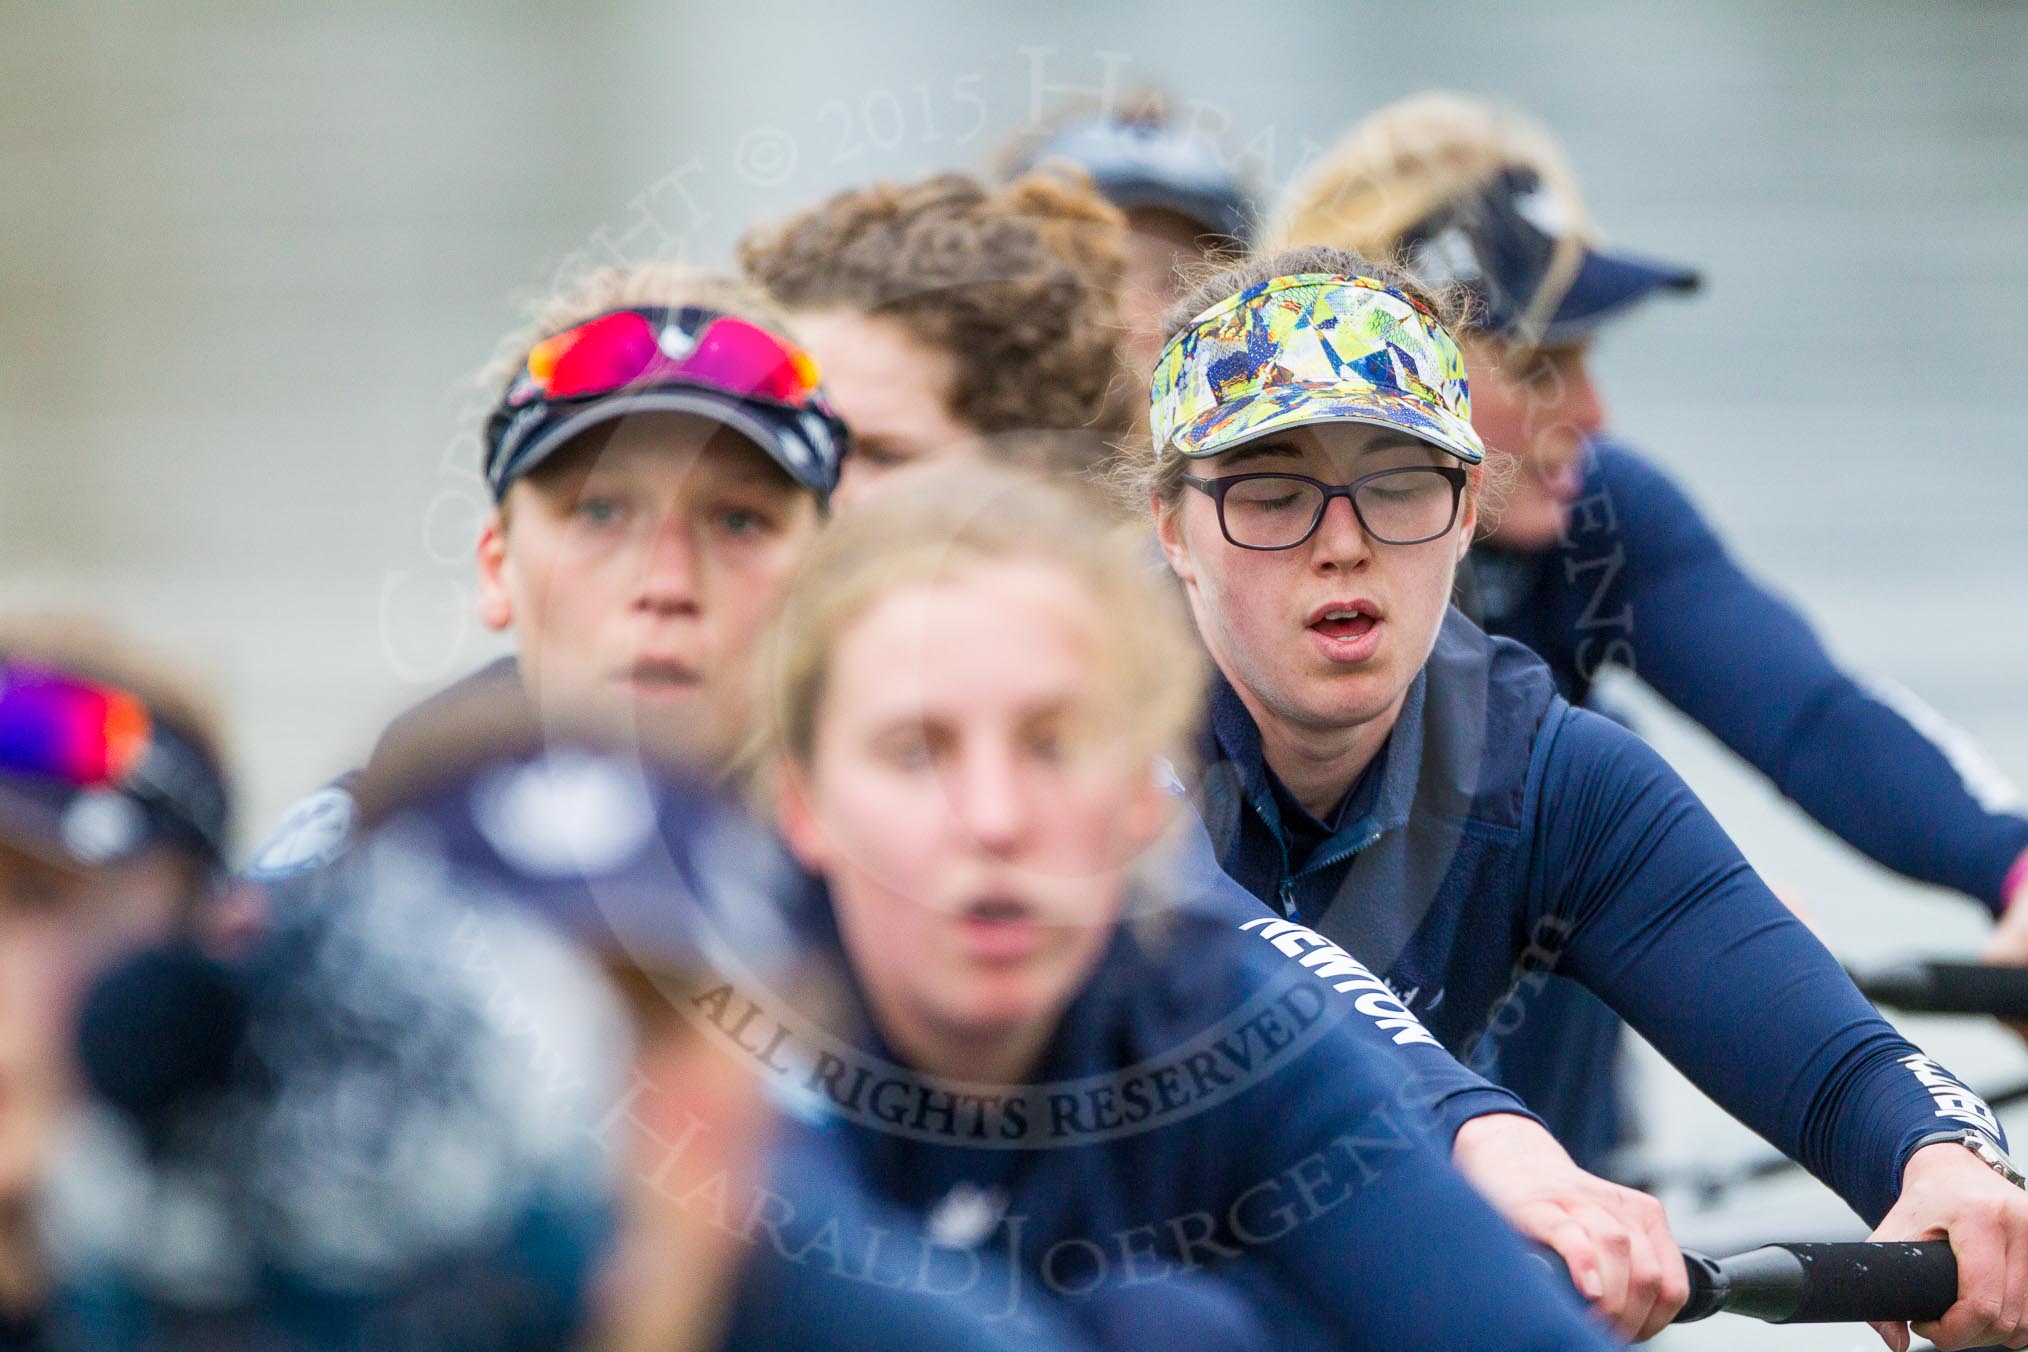 The Boat Race season 2016 - OUWBC training Wallingford: Ruth Siddorn, 4 seat in the OUWBC Blue Boat.
River Thames,
Wallingford,
Oxfordshire,

on 29 February 2016 at 16:34, image #143